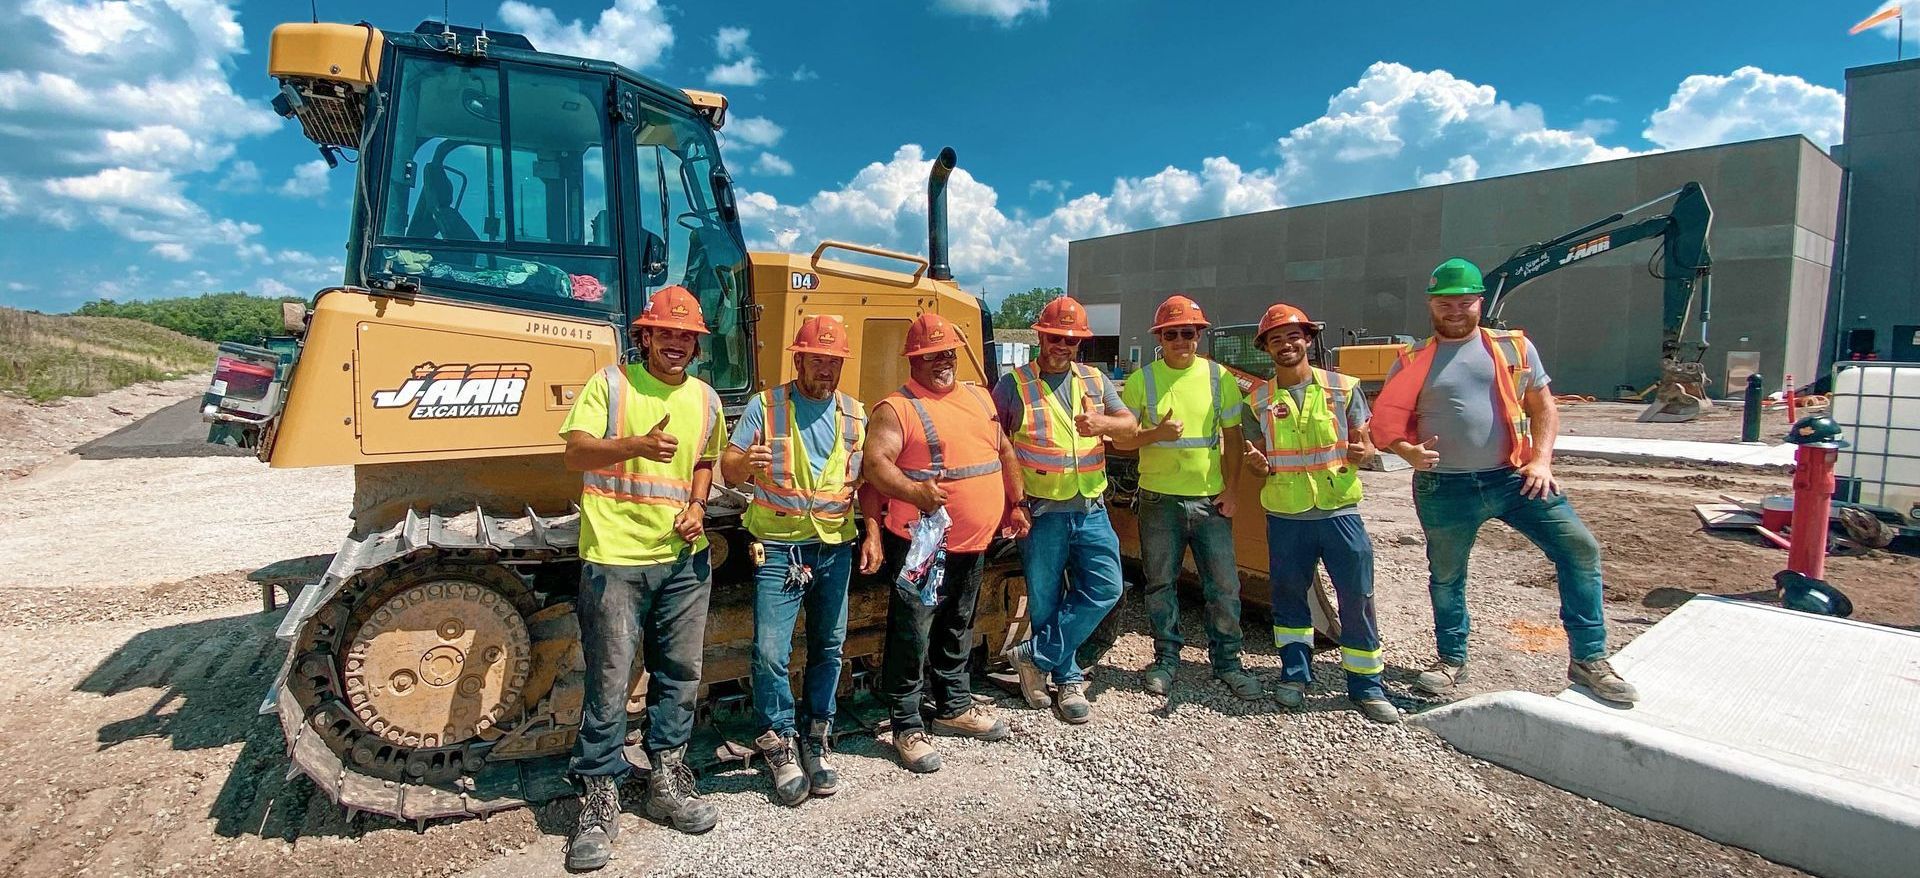 a group of construction workers are posing for a picture in front of a bulldozer with J-AAR career opportunities